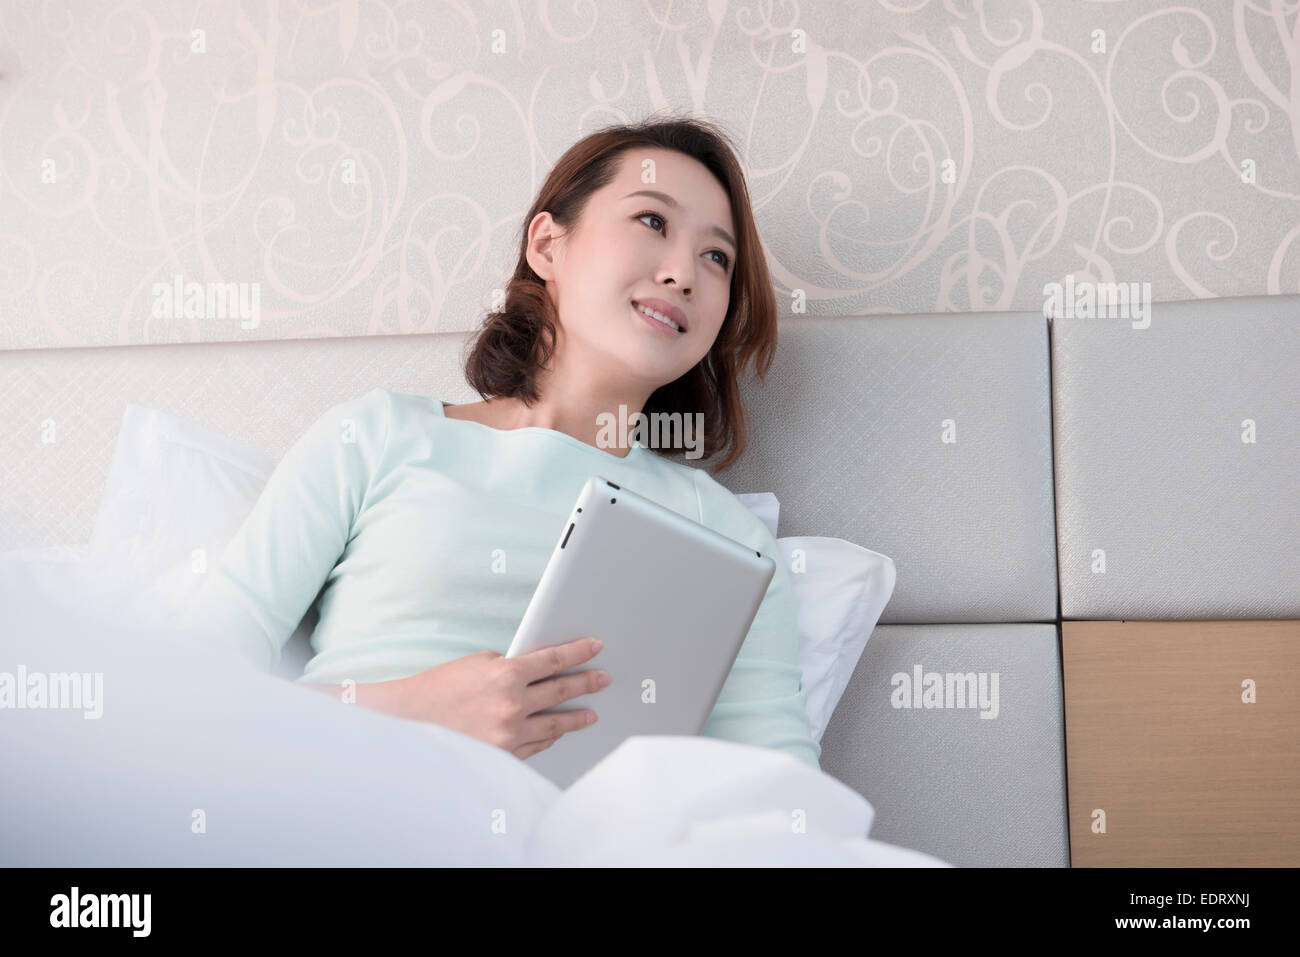 Young woman using digital tablet in bed Stock Photo